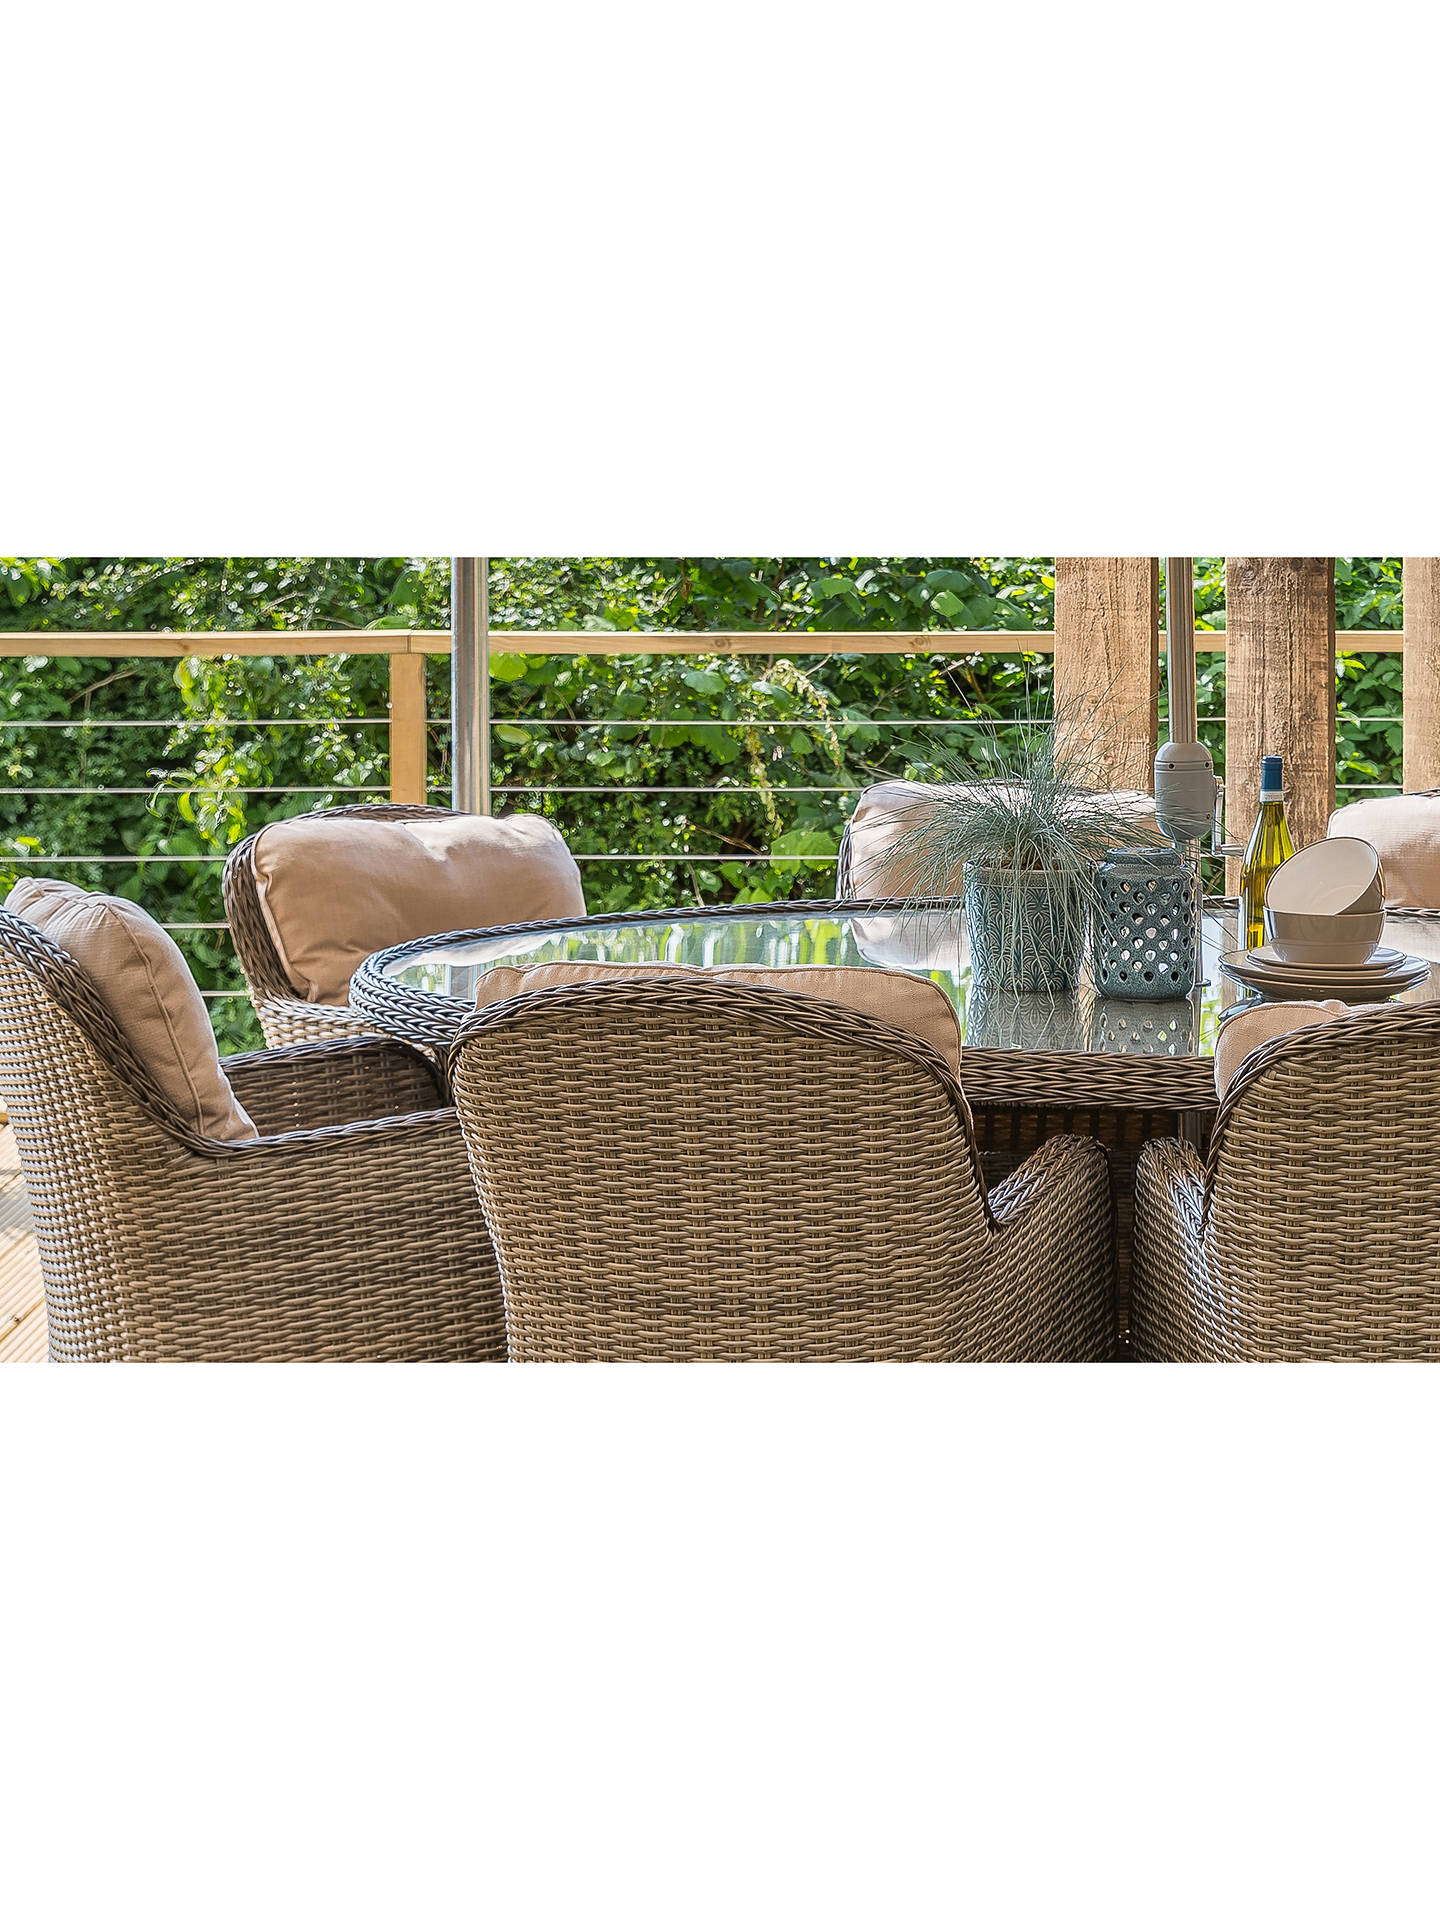 Lg Outdoor Marseille 8 Seater Oval Garden Dining Table And Chairs Set With Parasol Natural At John Lewis Partners